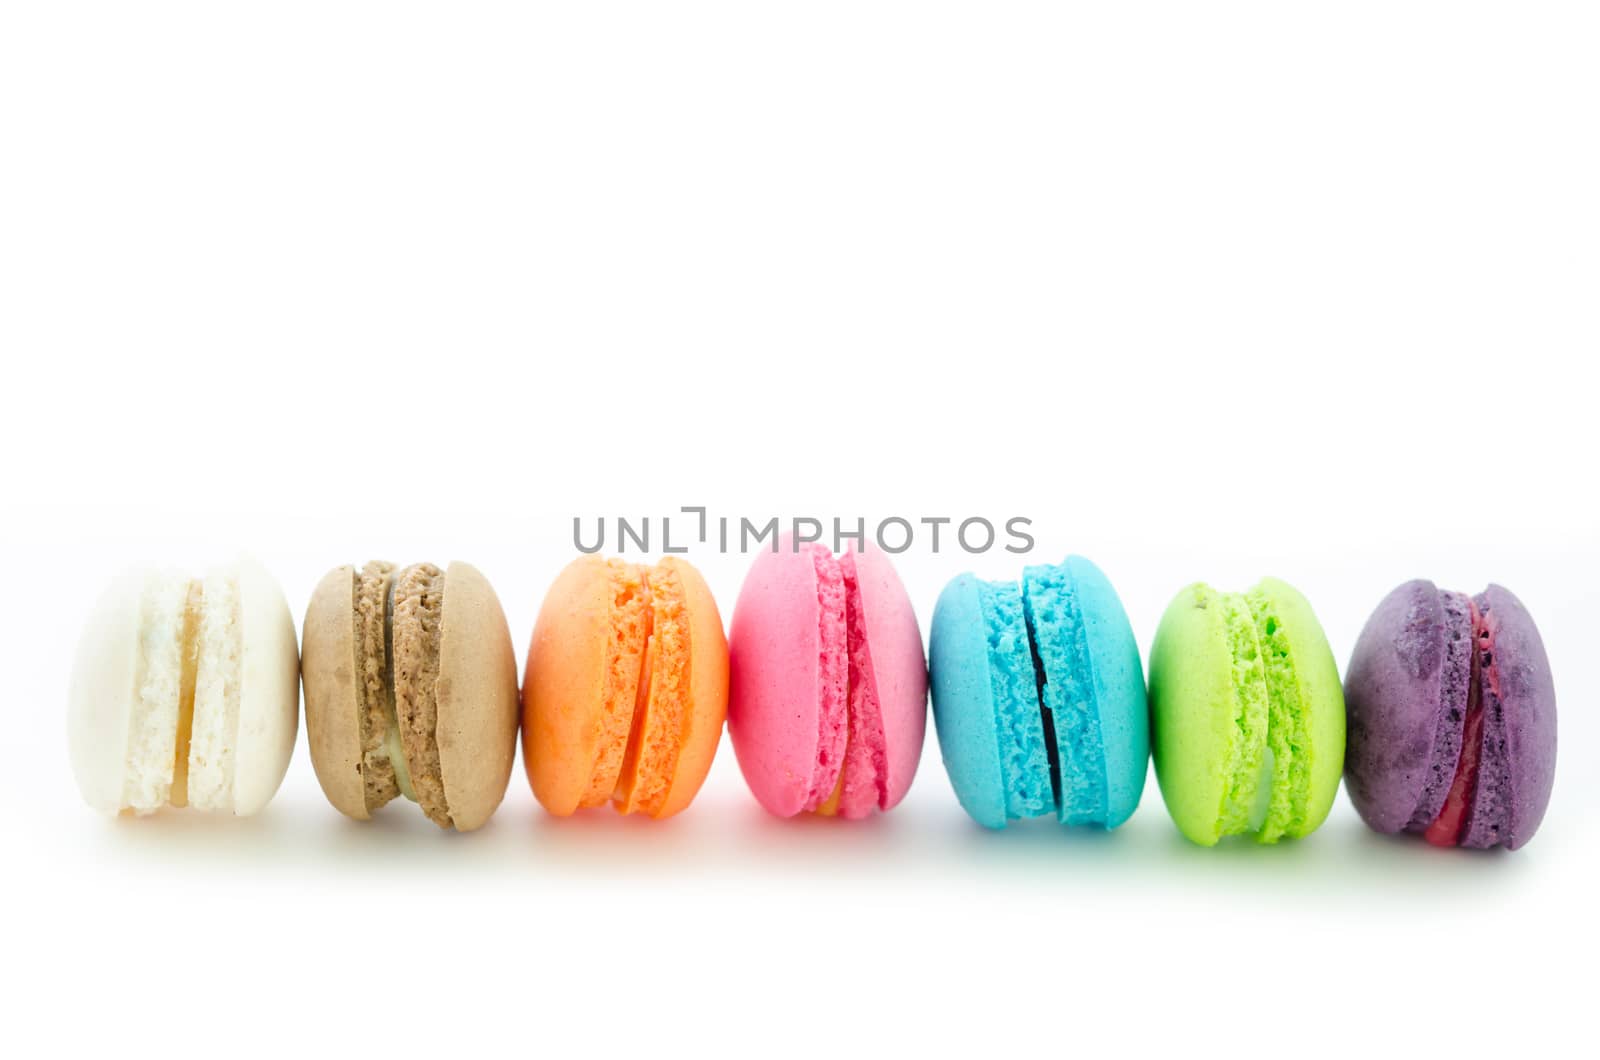 Colorful macarons on white background. Macaron is sweet meringue-based confection.